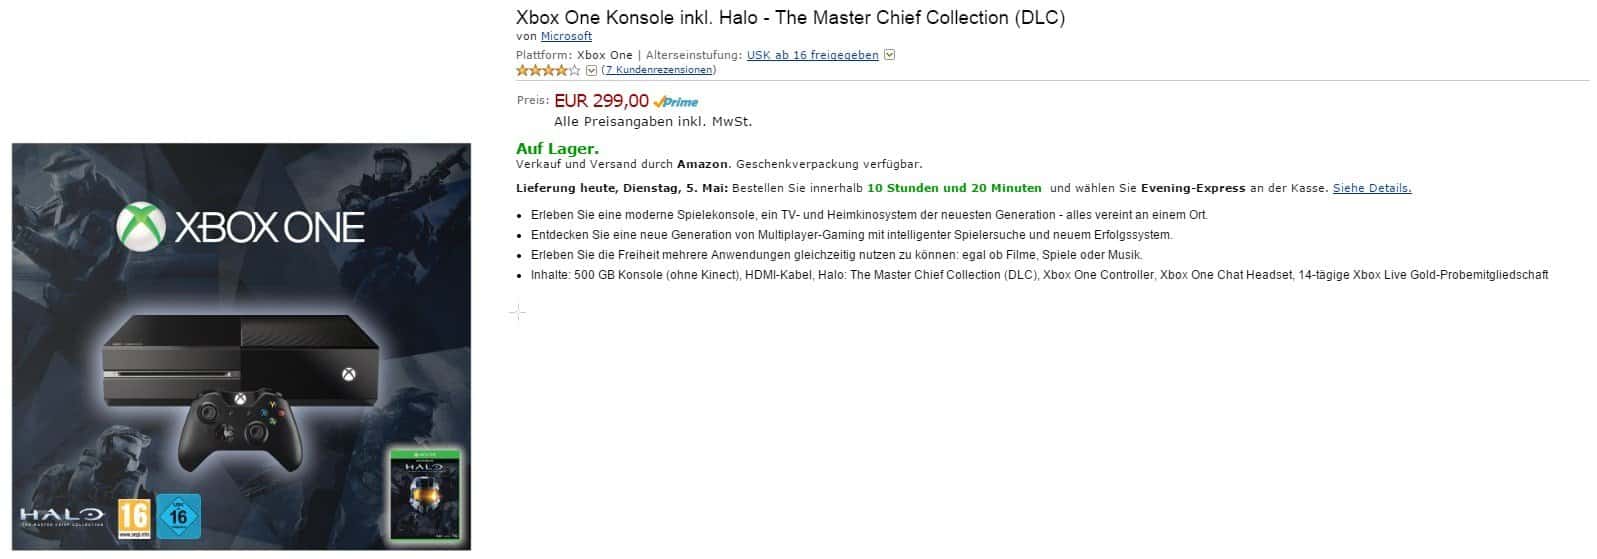 Amazon - Xbox One Konsole - Headset - Halo The Master Chief Collection